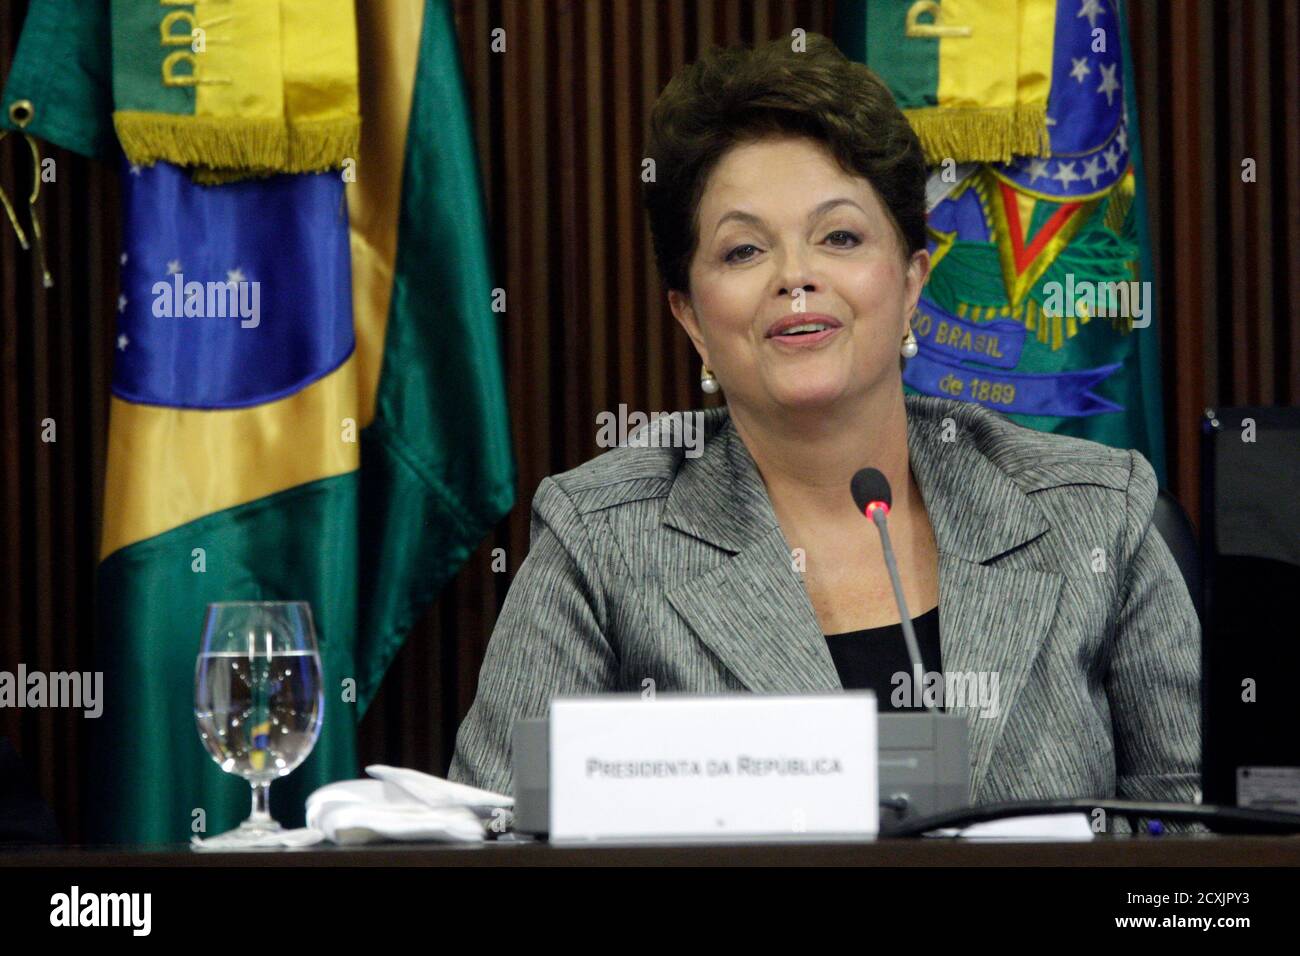 Brazil's President Dilma Rousseff attends a meeting with a political council in Brasilia August 29, 2011. Rousseff will outline a tight budget for next year on Monday, government sources said, reaffirming her commitment to spending control and paving the way for interest rate cuts.                          REUTERS/Ueslei Marcelino (BRAZIL - Tags: POLITICS BUSINESS) Stock Photo